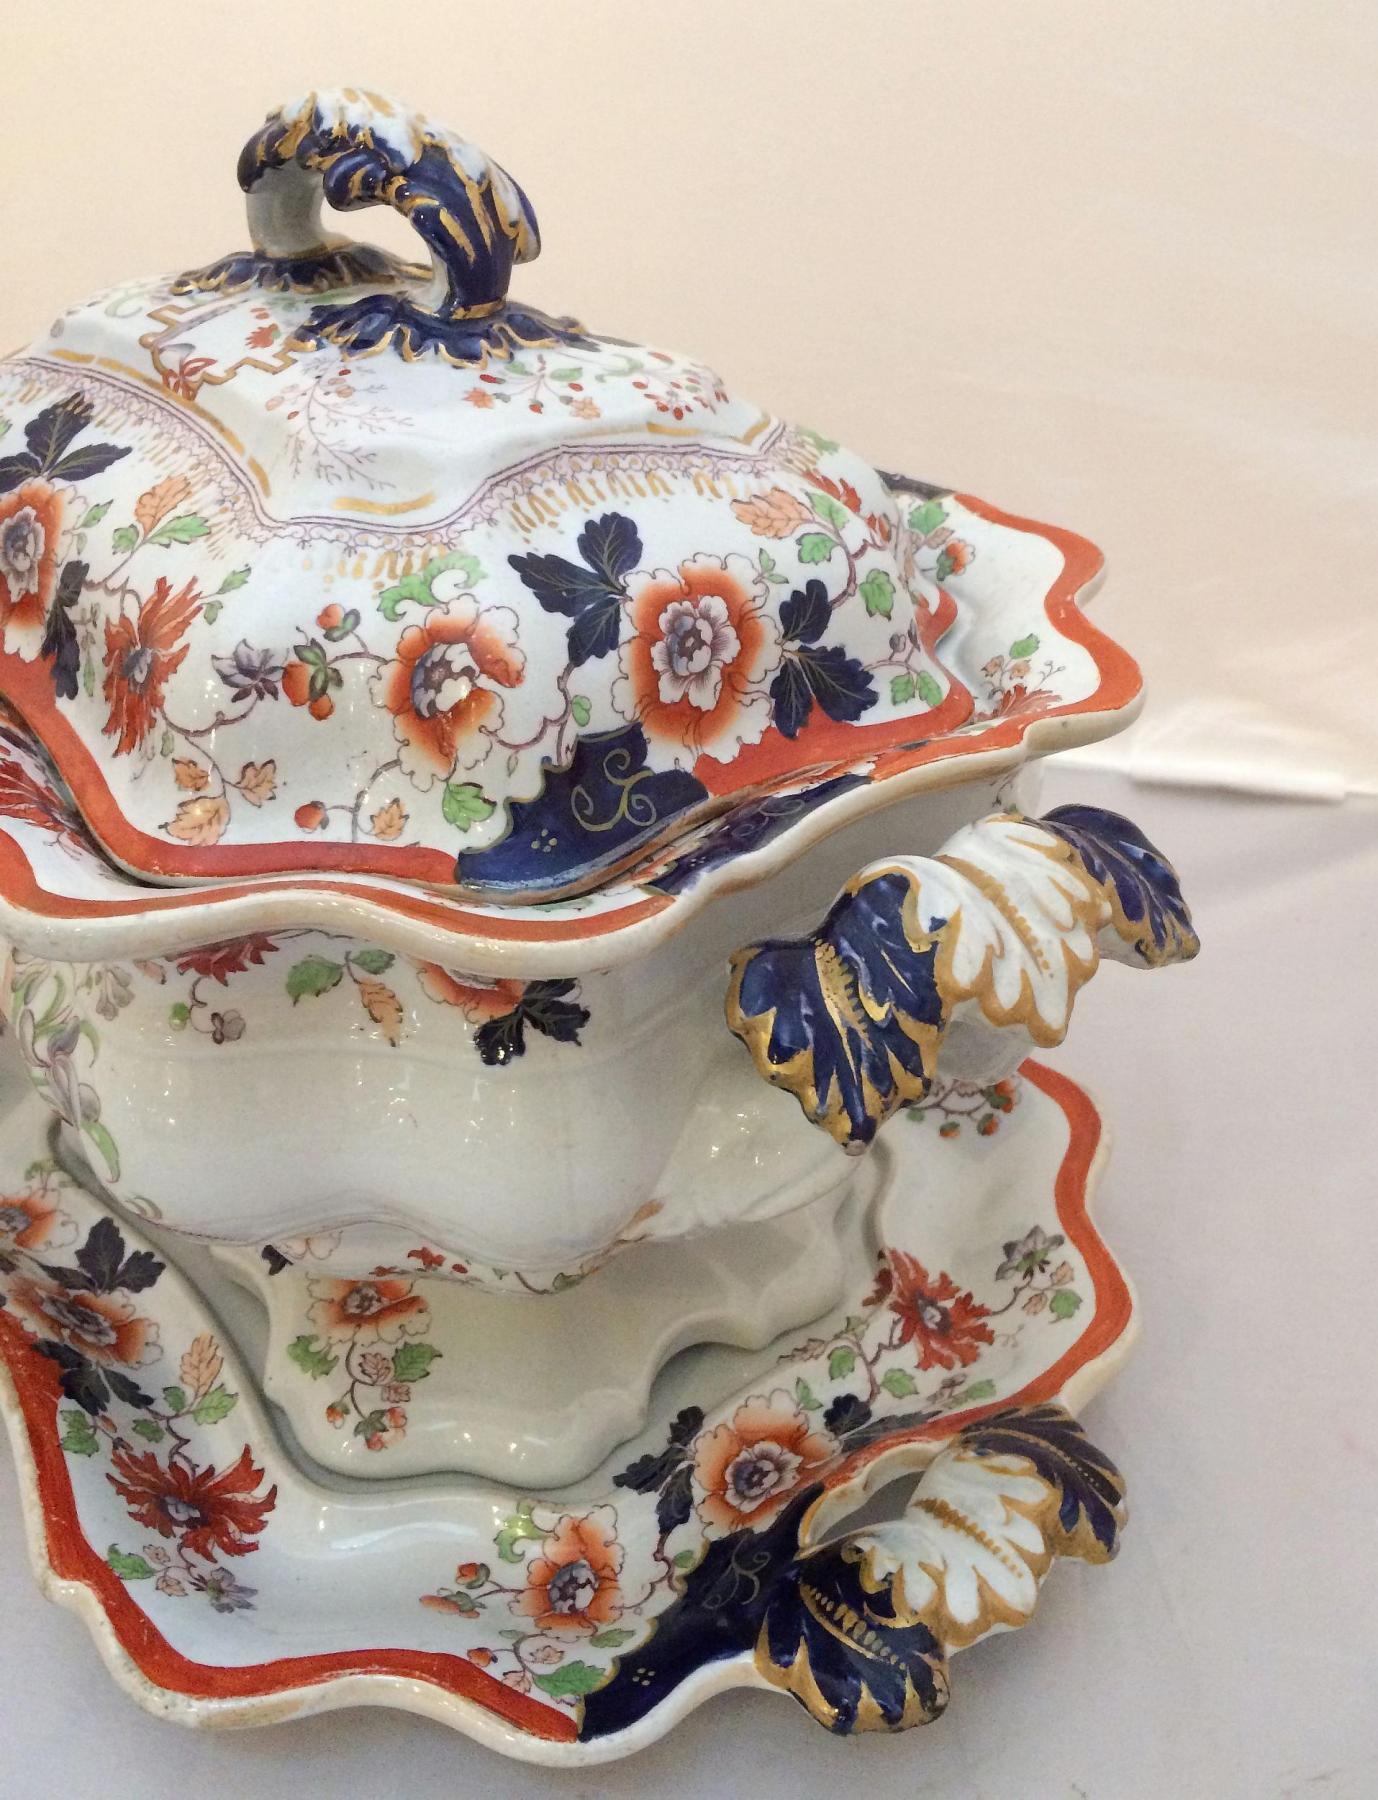 t3433_hicks_meigh_and_johnson_tureen_13